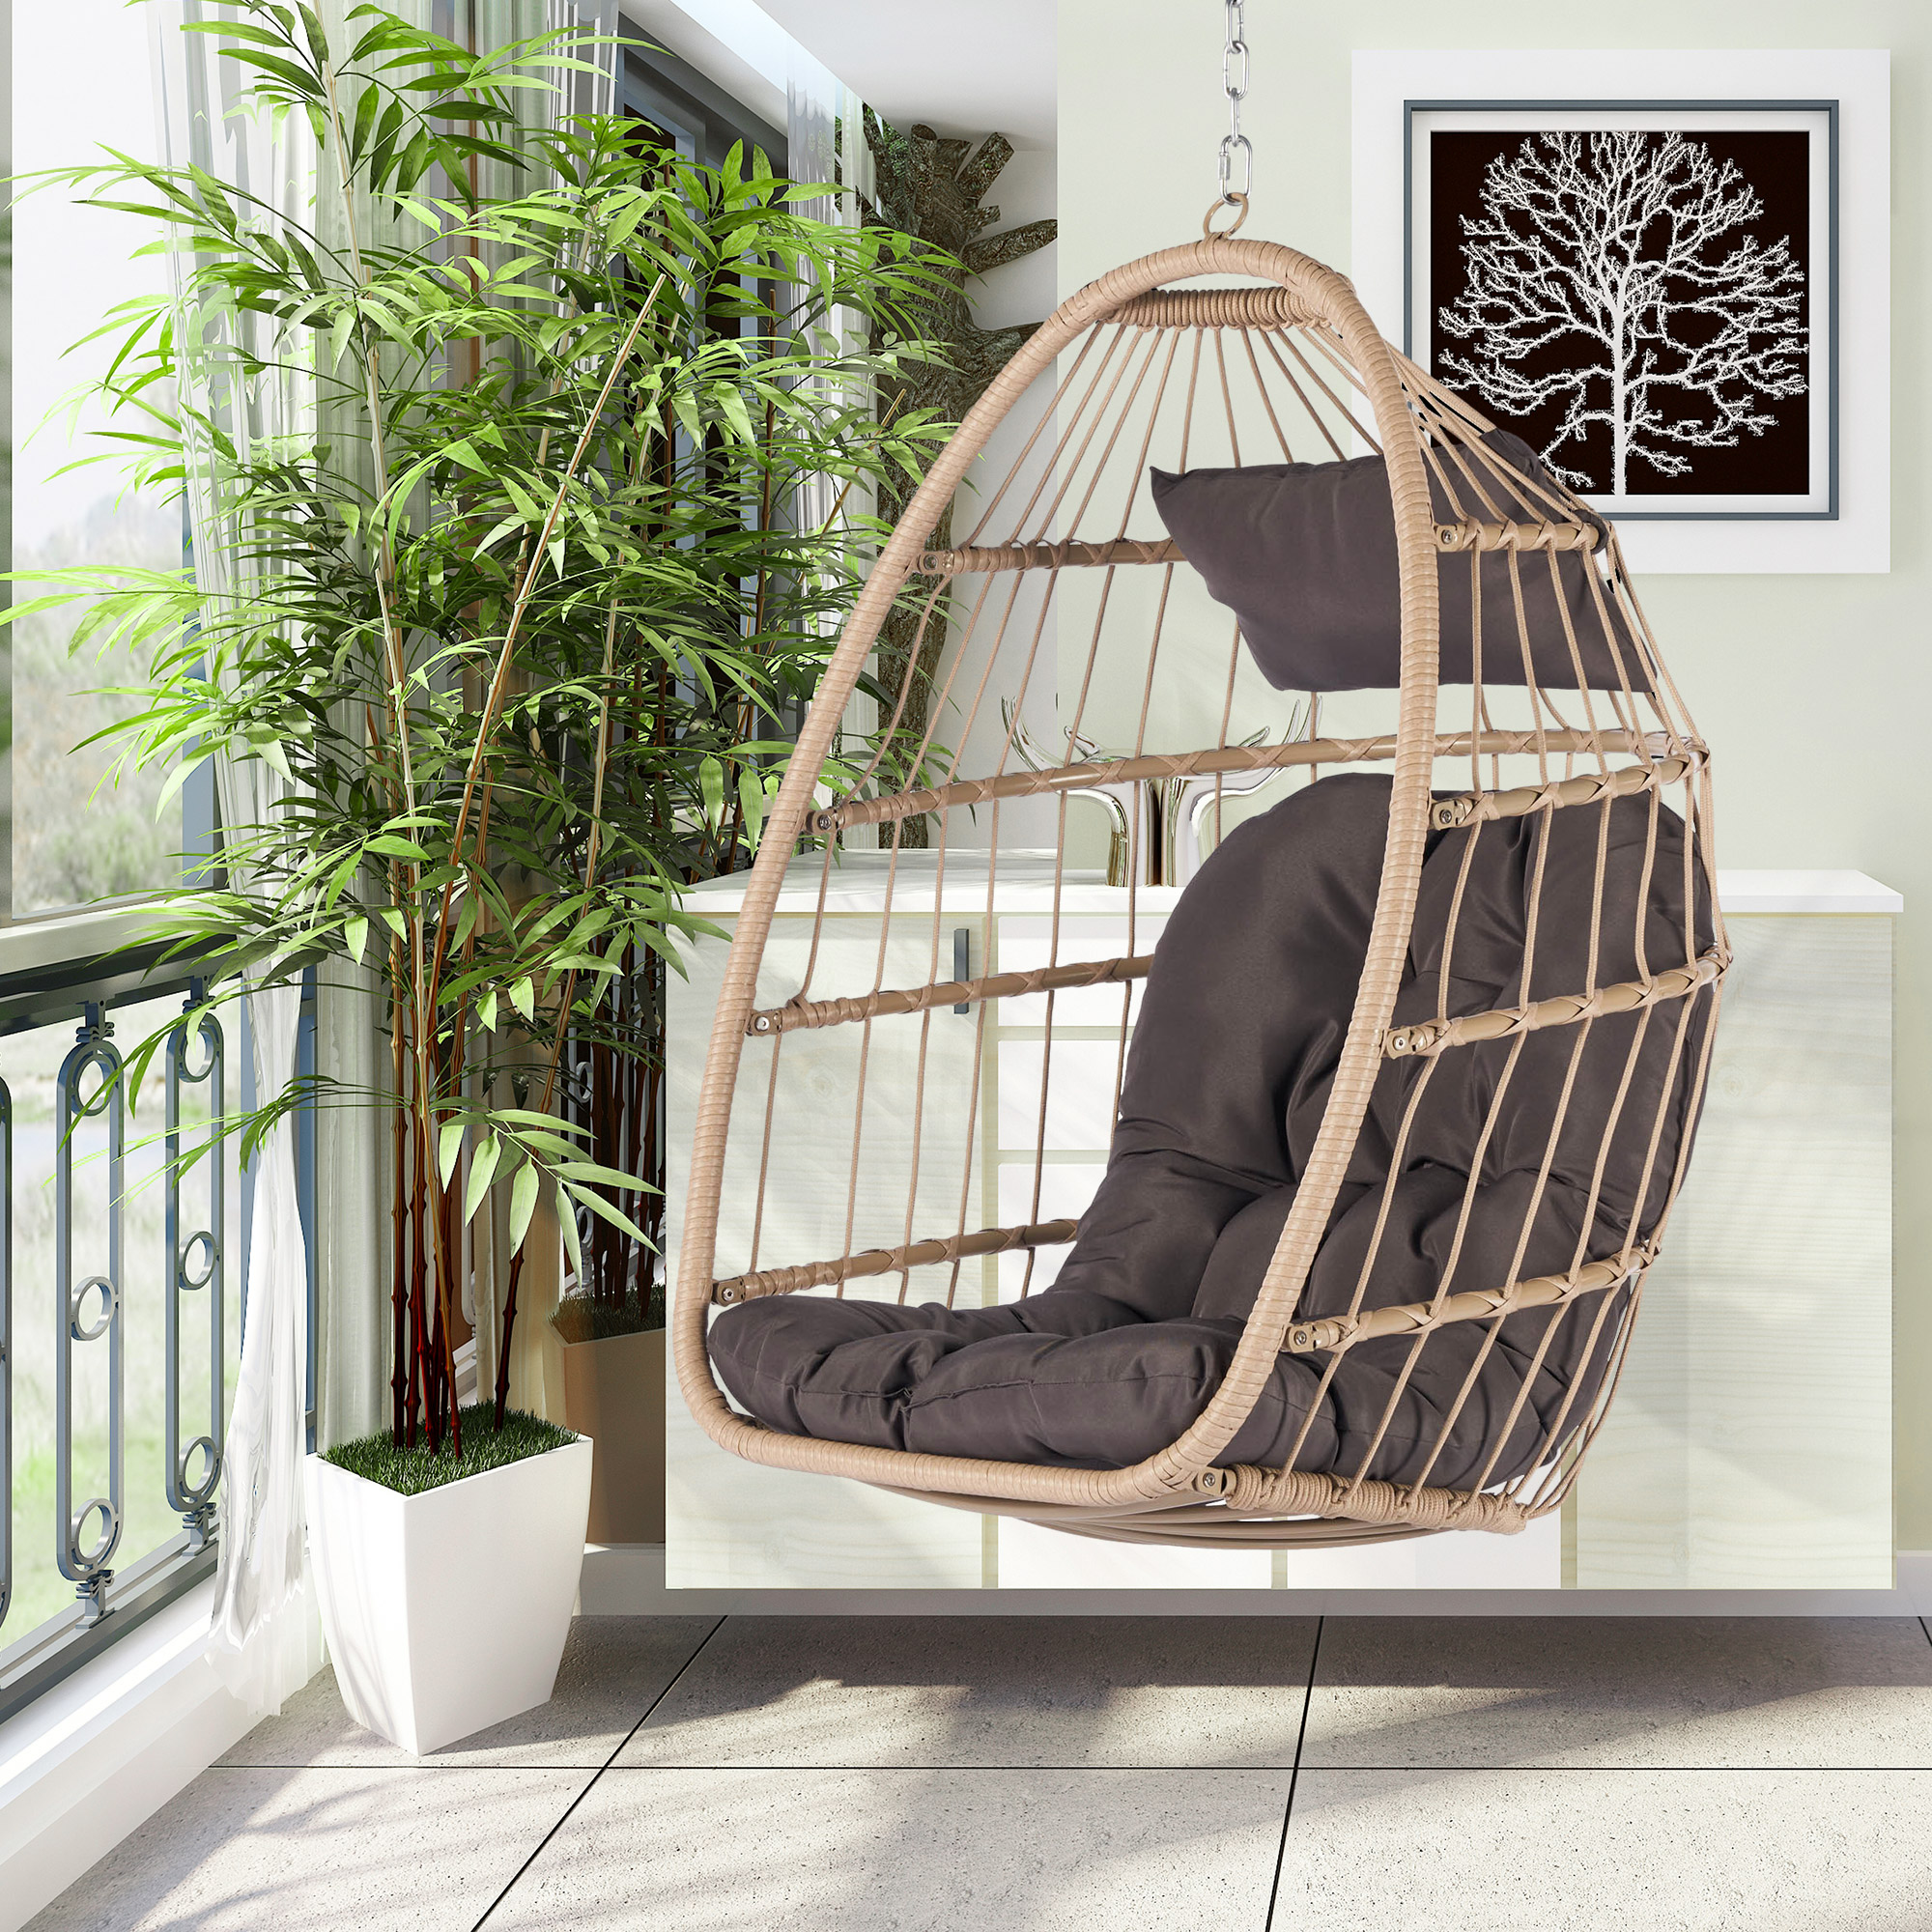 Egg Chair with Hanging Chains, SYNGAR Outdoor All Weather Wicker Hanging Hammock Chair with Dark Gray Cushions, Patio Foldable Basket Swing Chair, for Porch, Balcony, Backyard, Garden, Bedroom, D7708 - image 1 of 10